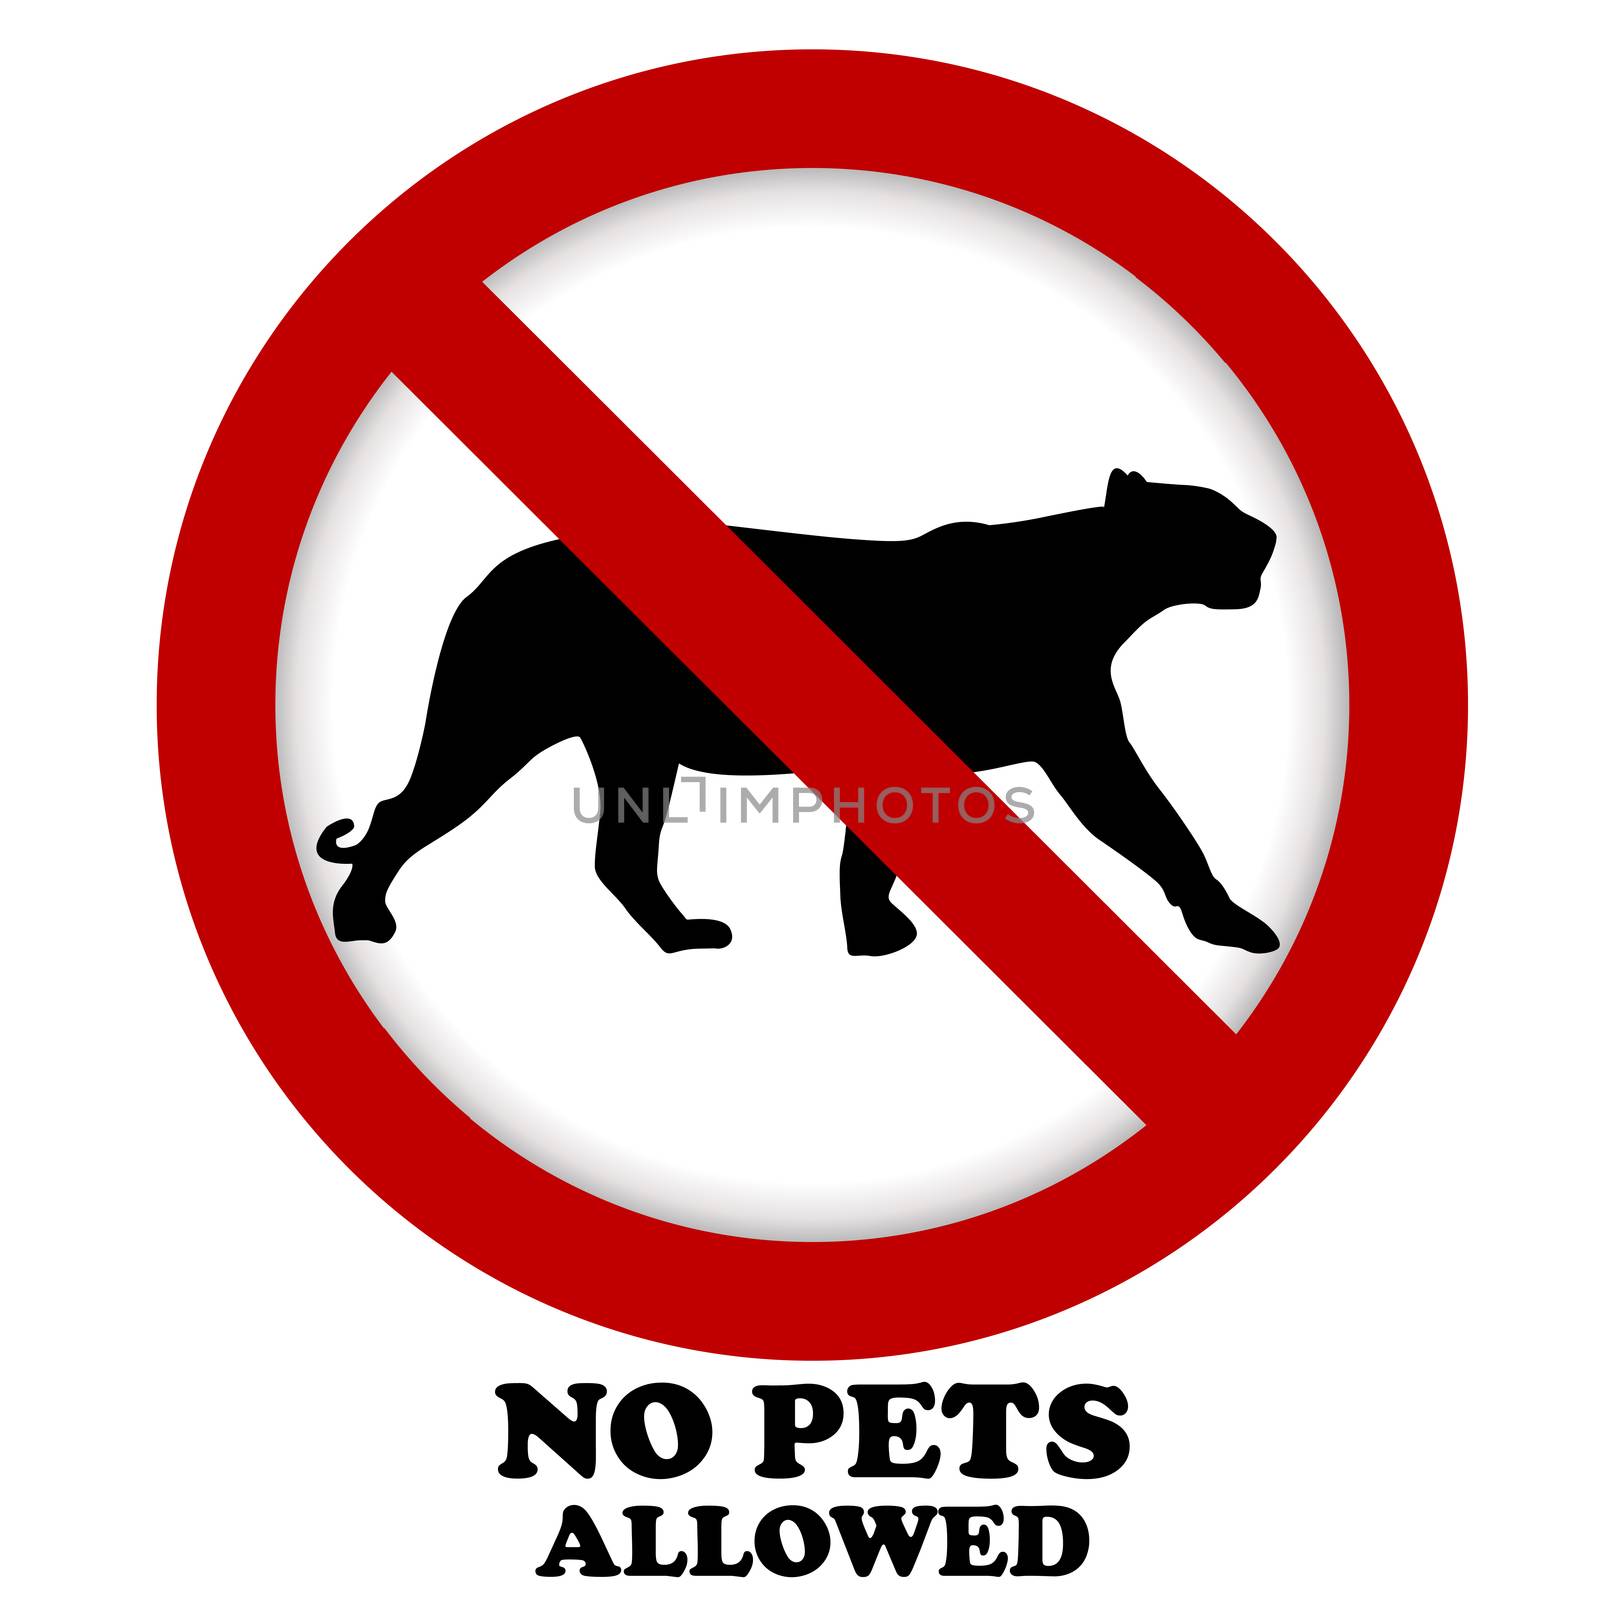 Prohibition pet sign illustration with silhouette of panther by hibrida13